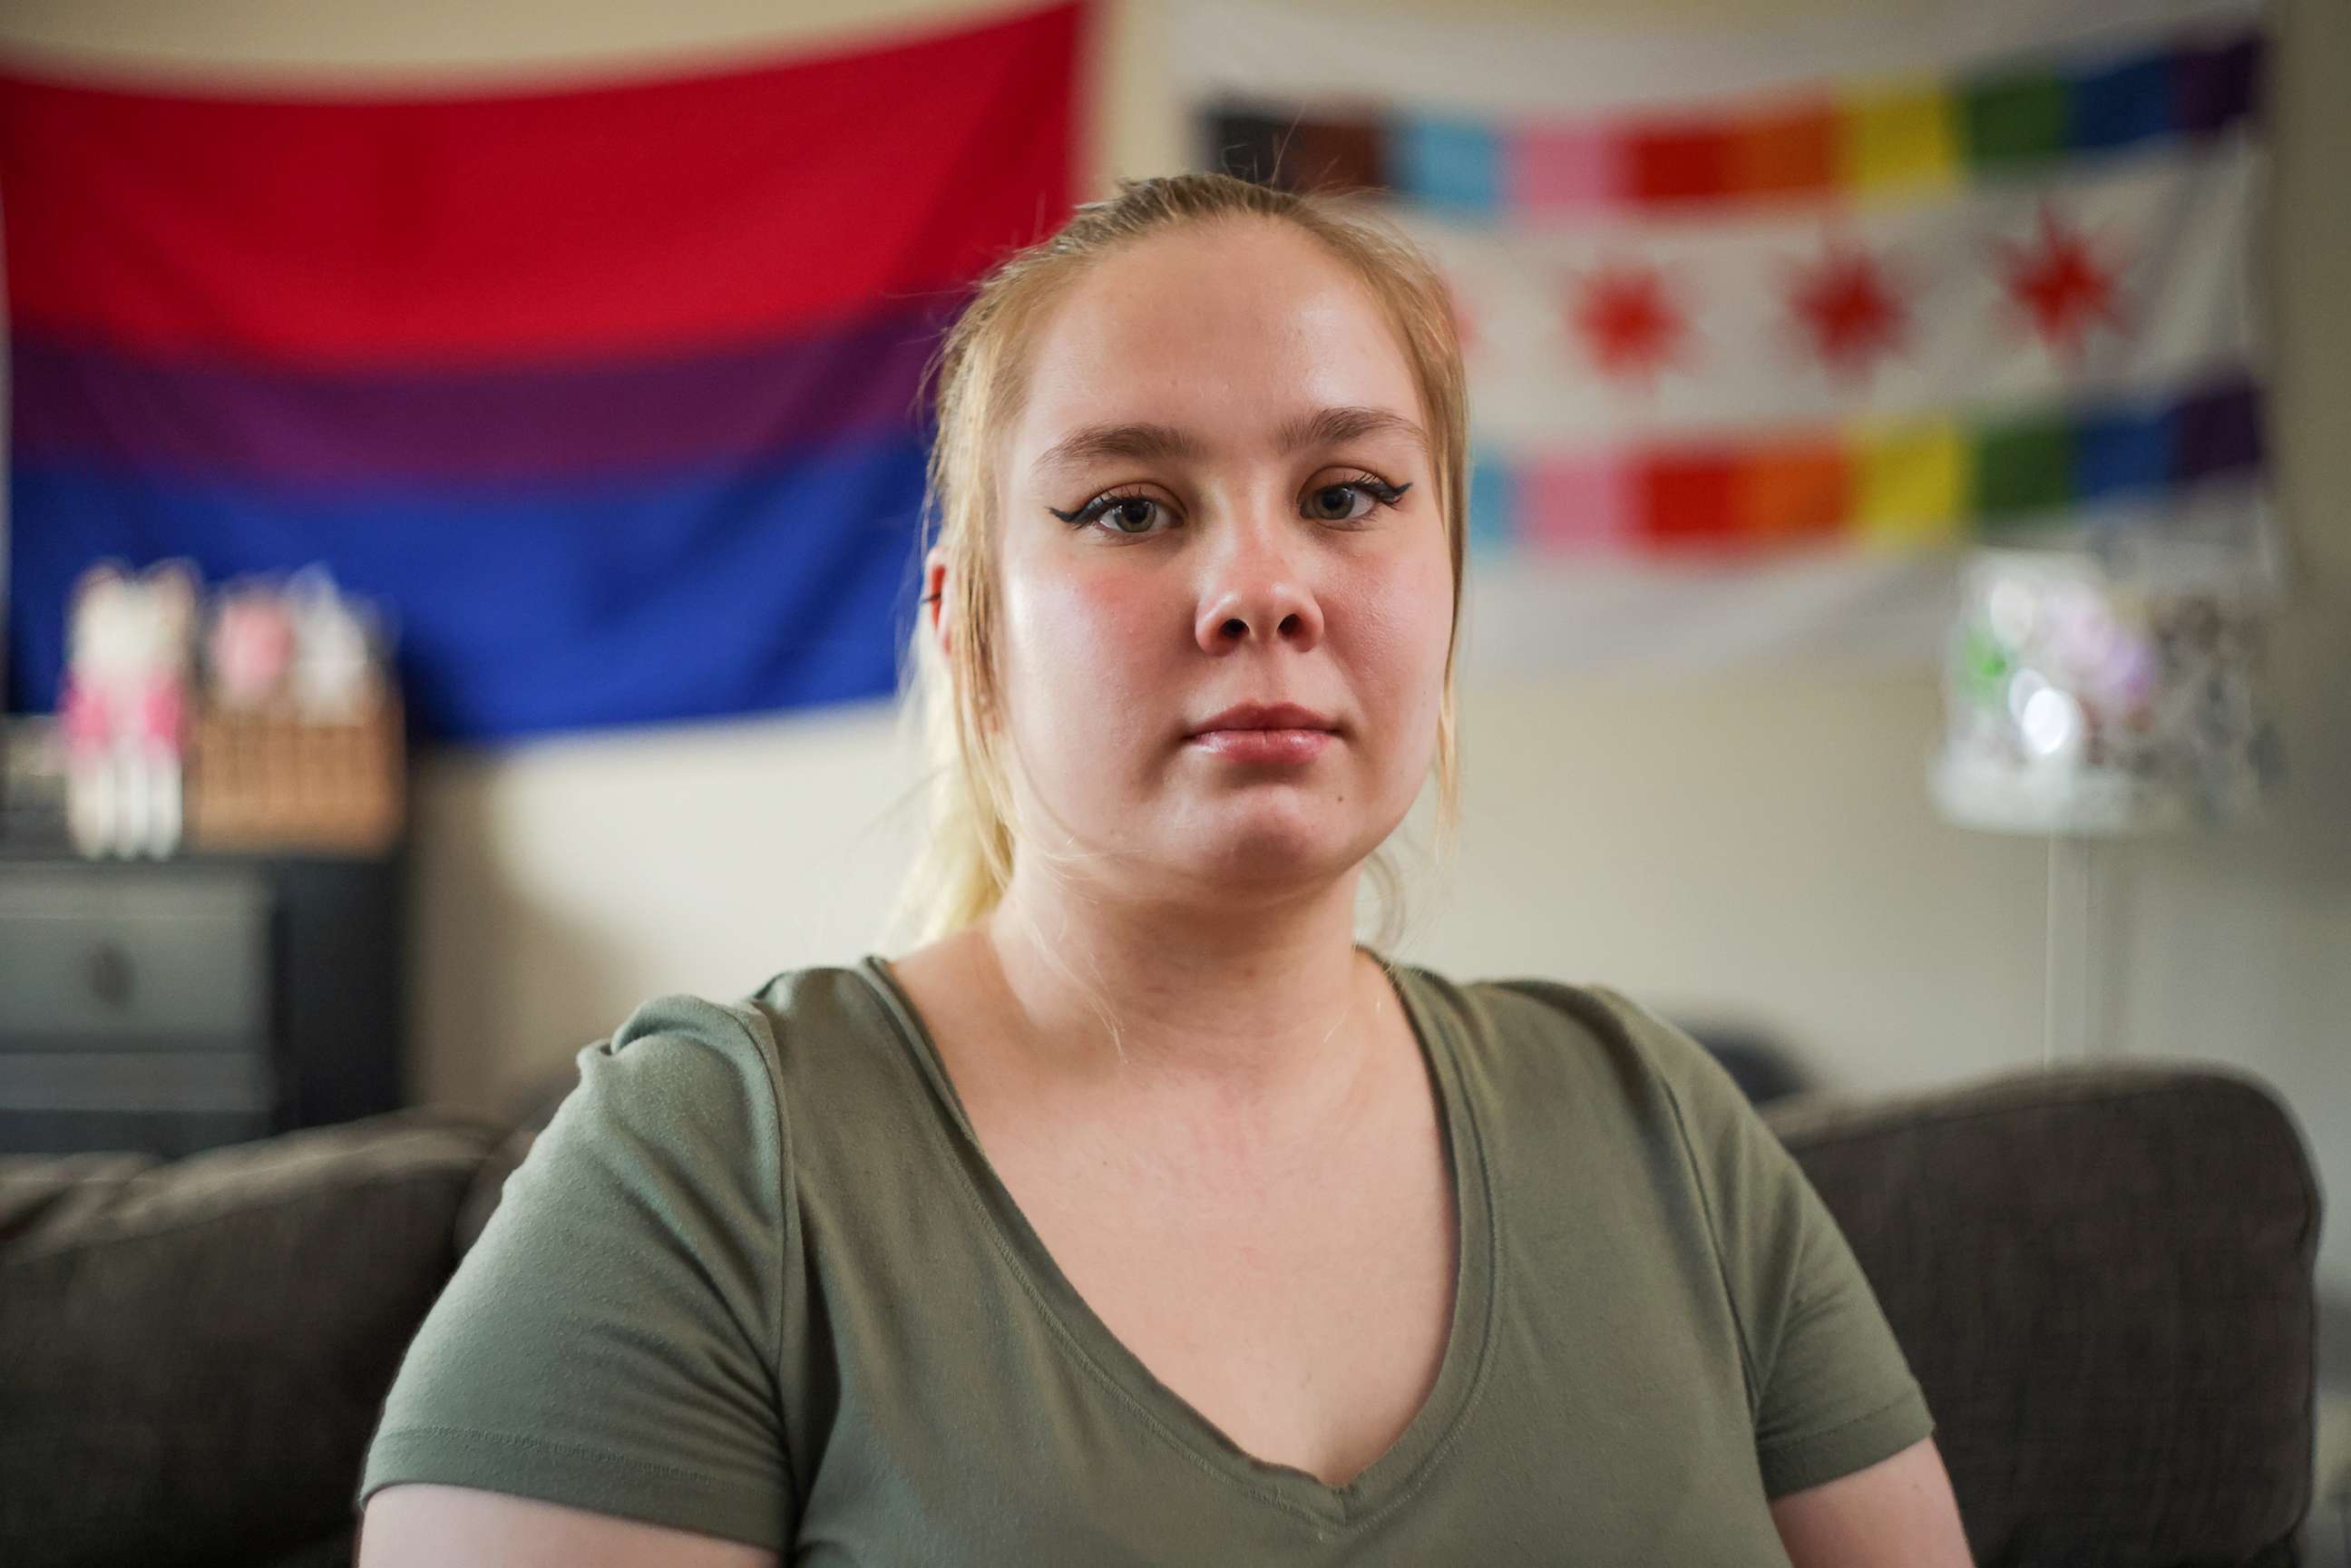 PHOTO: Svetlana Heim, a bisexual woman and survivor of the Club Q shooting, refuses to hide following the shooting tragedy.